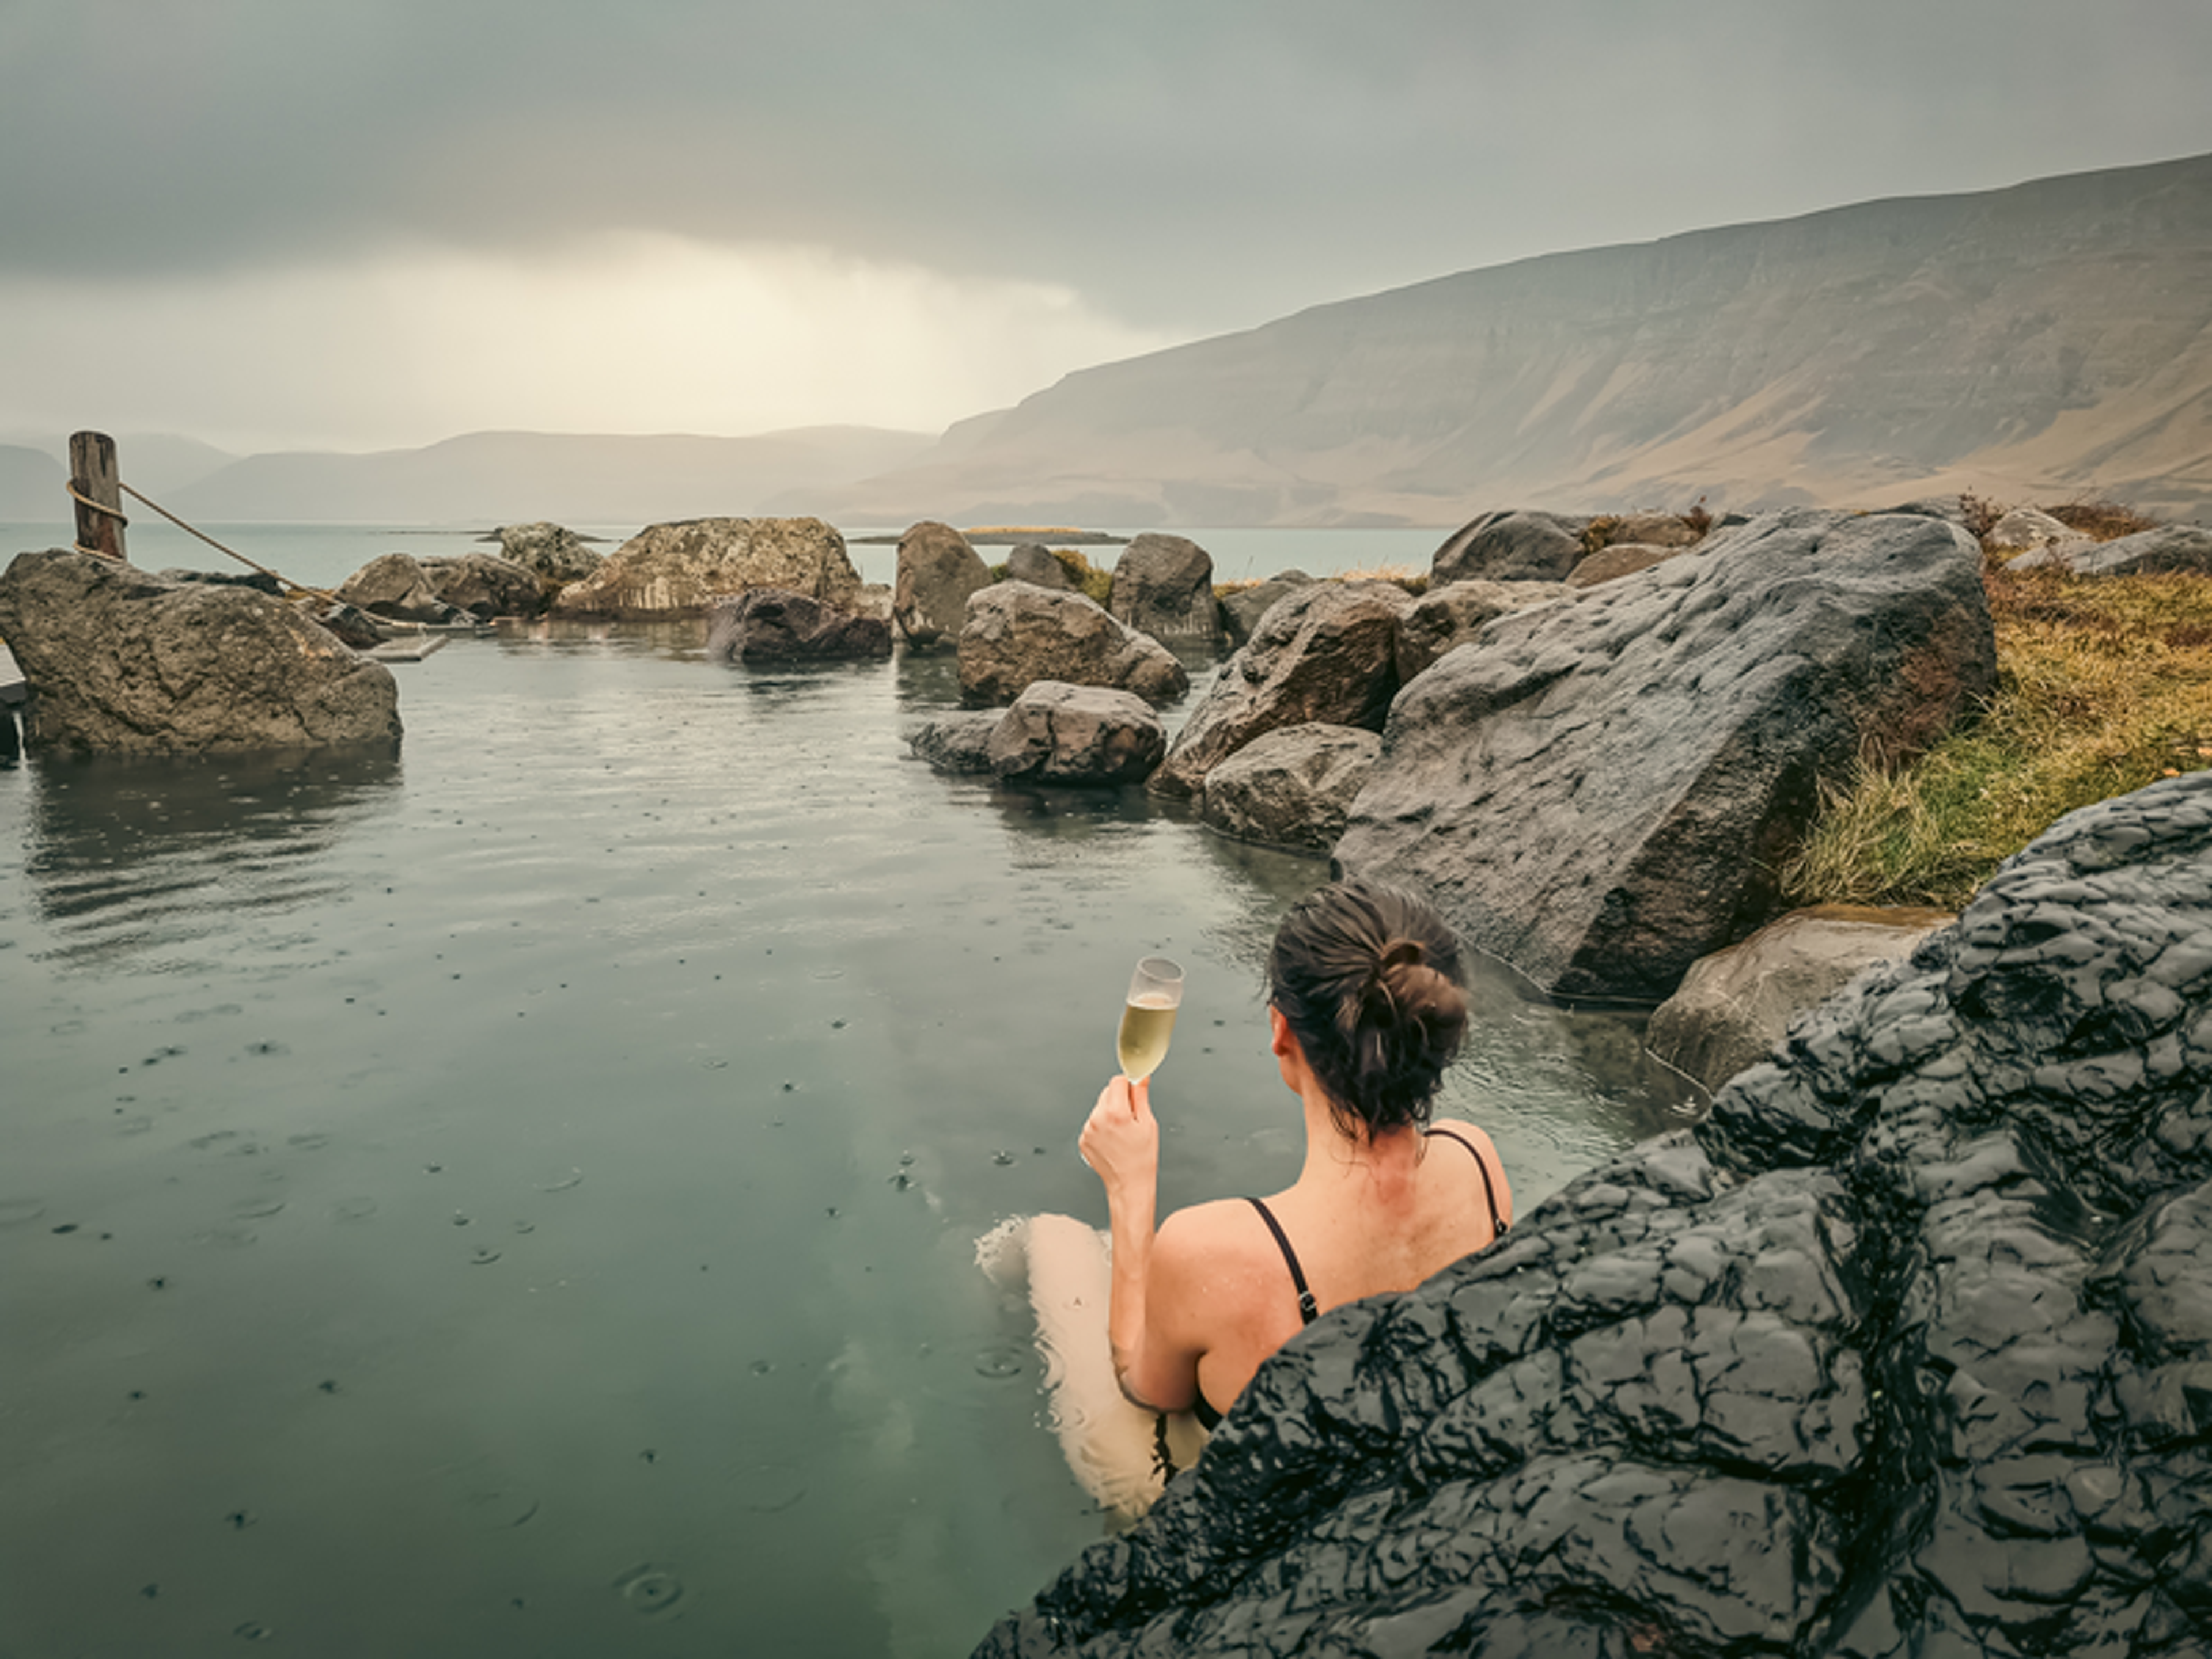 Person relaxing in a geothermal pool surrounded by rocks, holding a beverage, with mountains in the background.